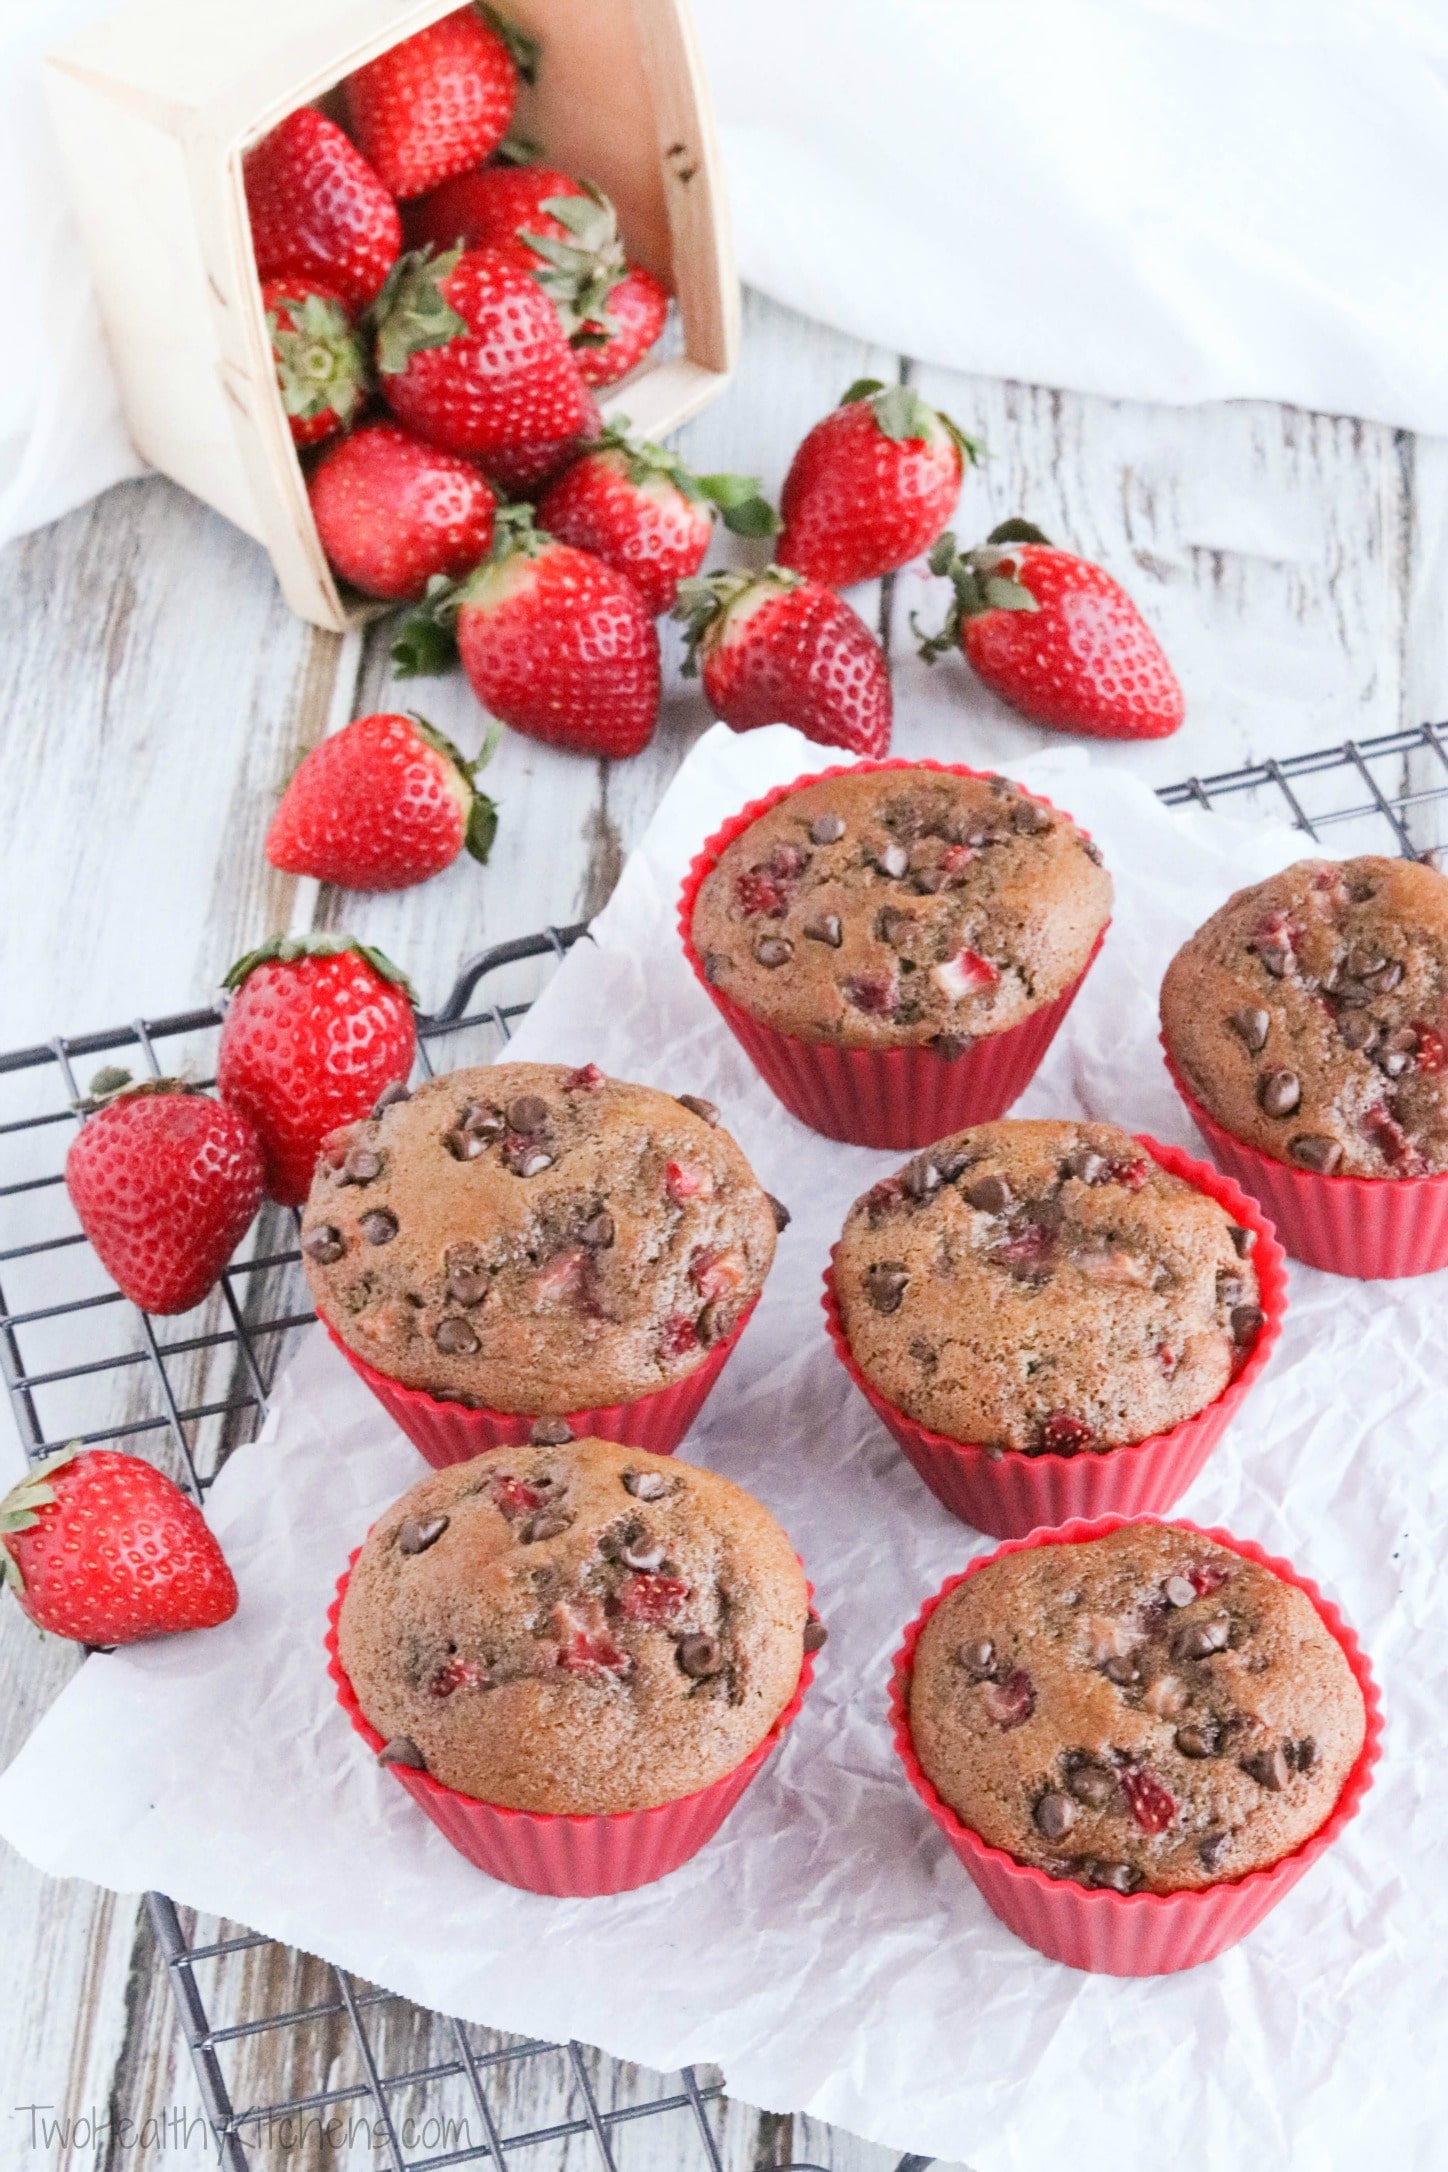 Six of the muffins in red liners on a cooling rack lined with white parchment, with fresh strawberries cascading nearby.